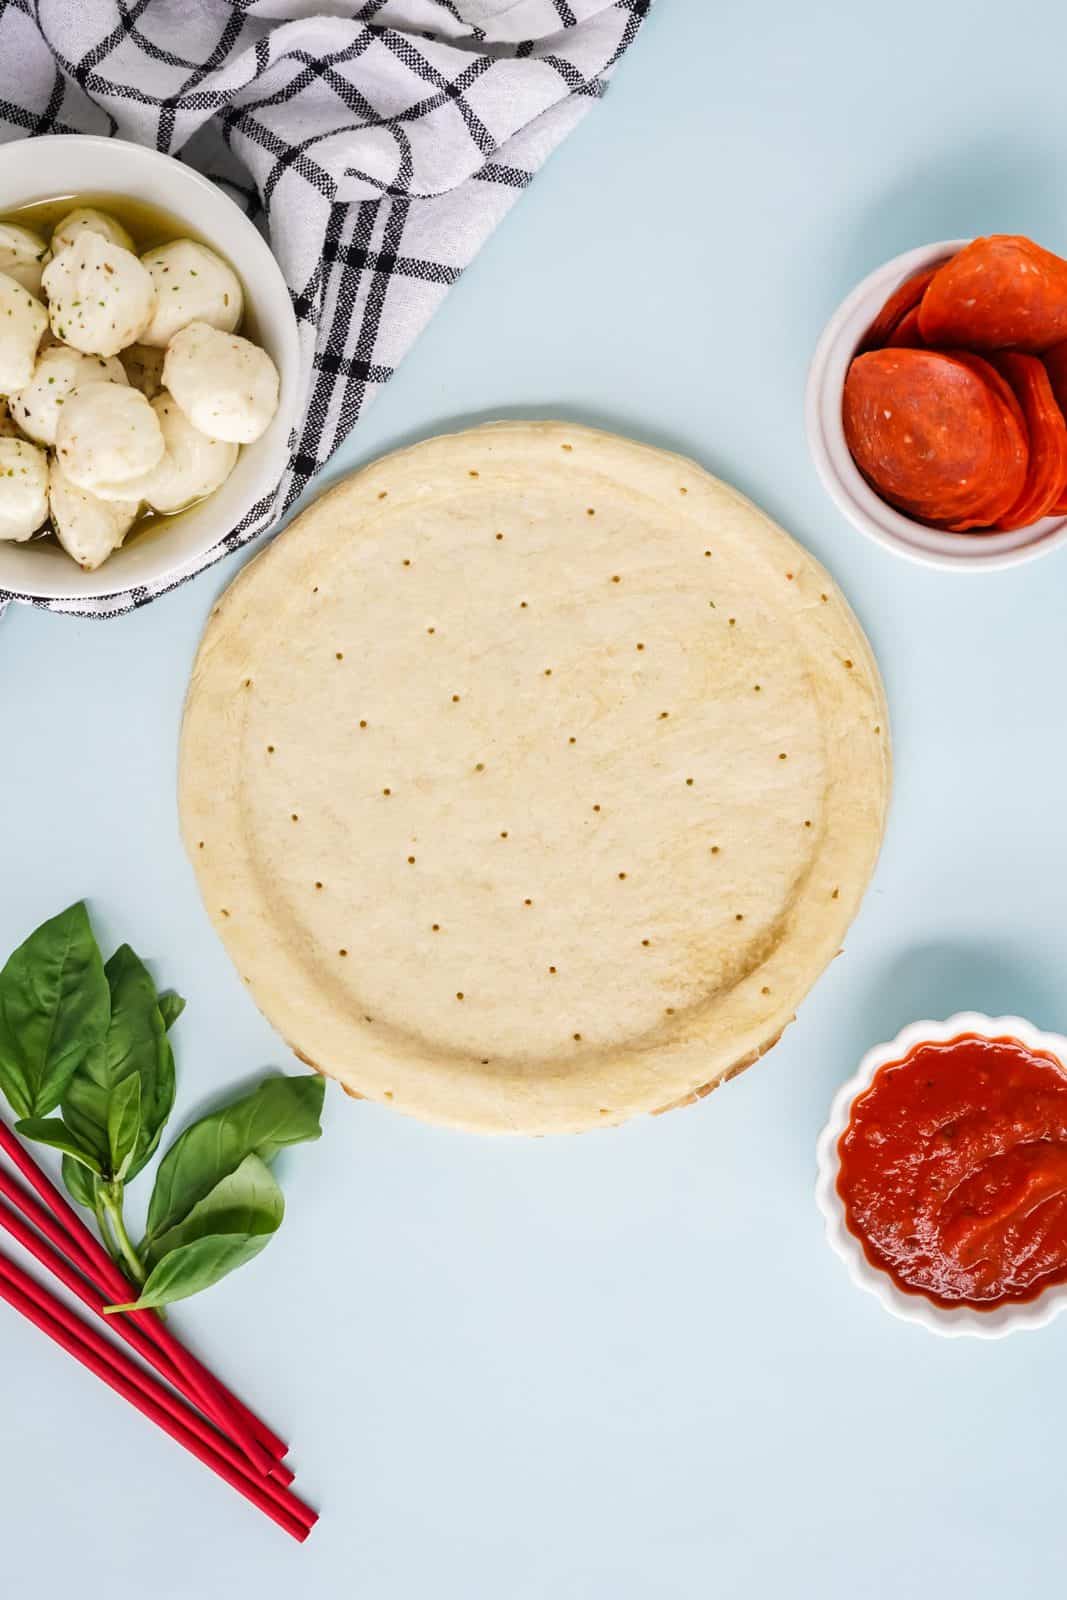 Ingredients needed: pre-made pizza crusts, marinated mozzarella balls, pepperoni, fresh basil leaves and pizza sauce.